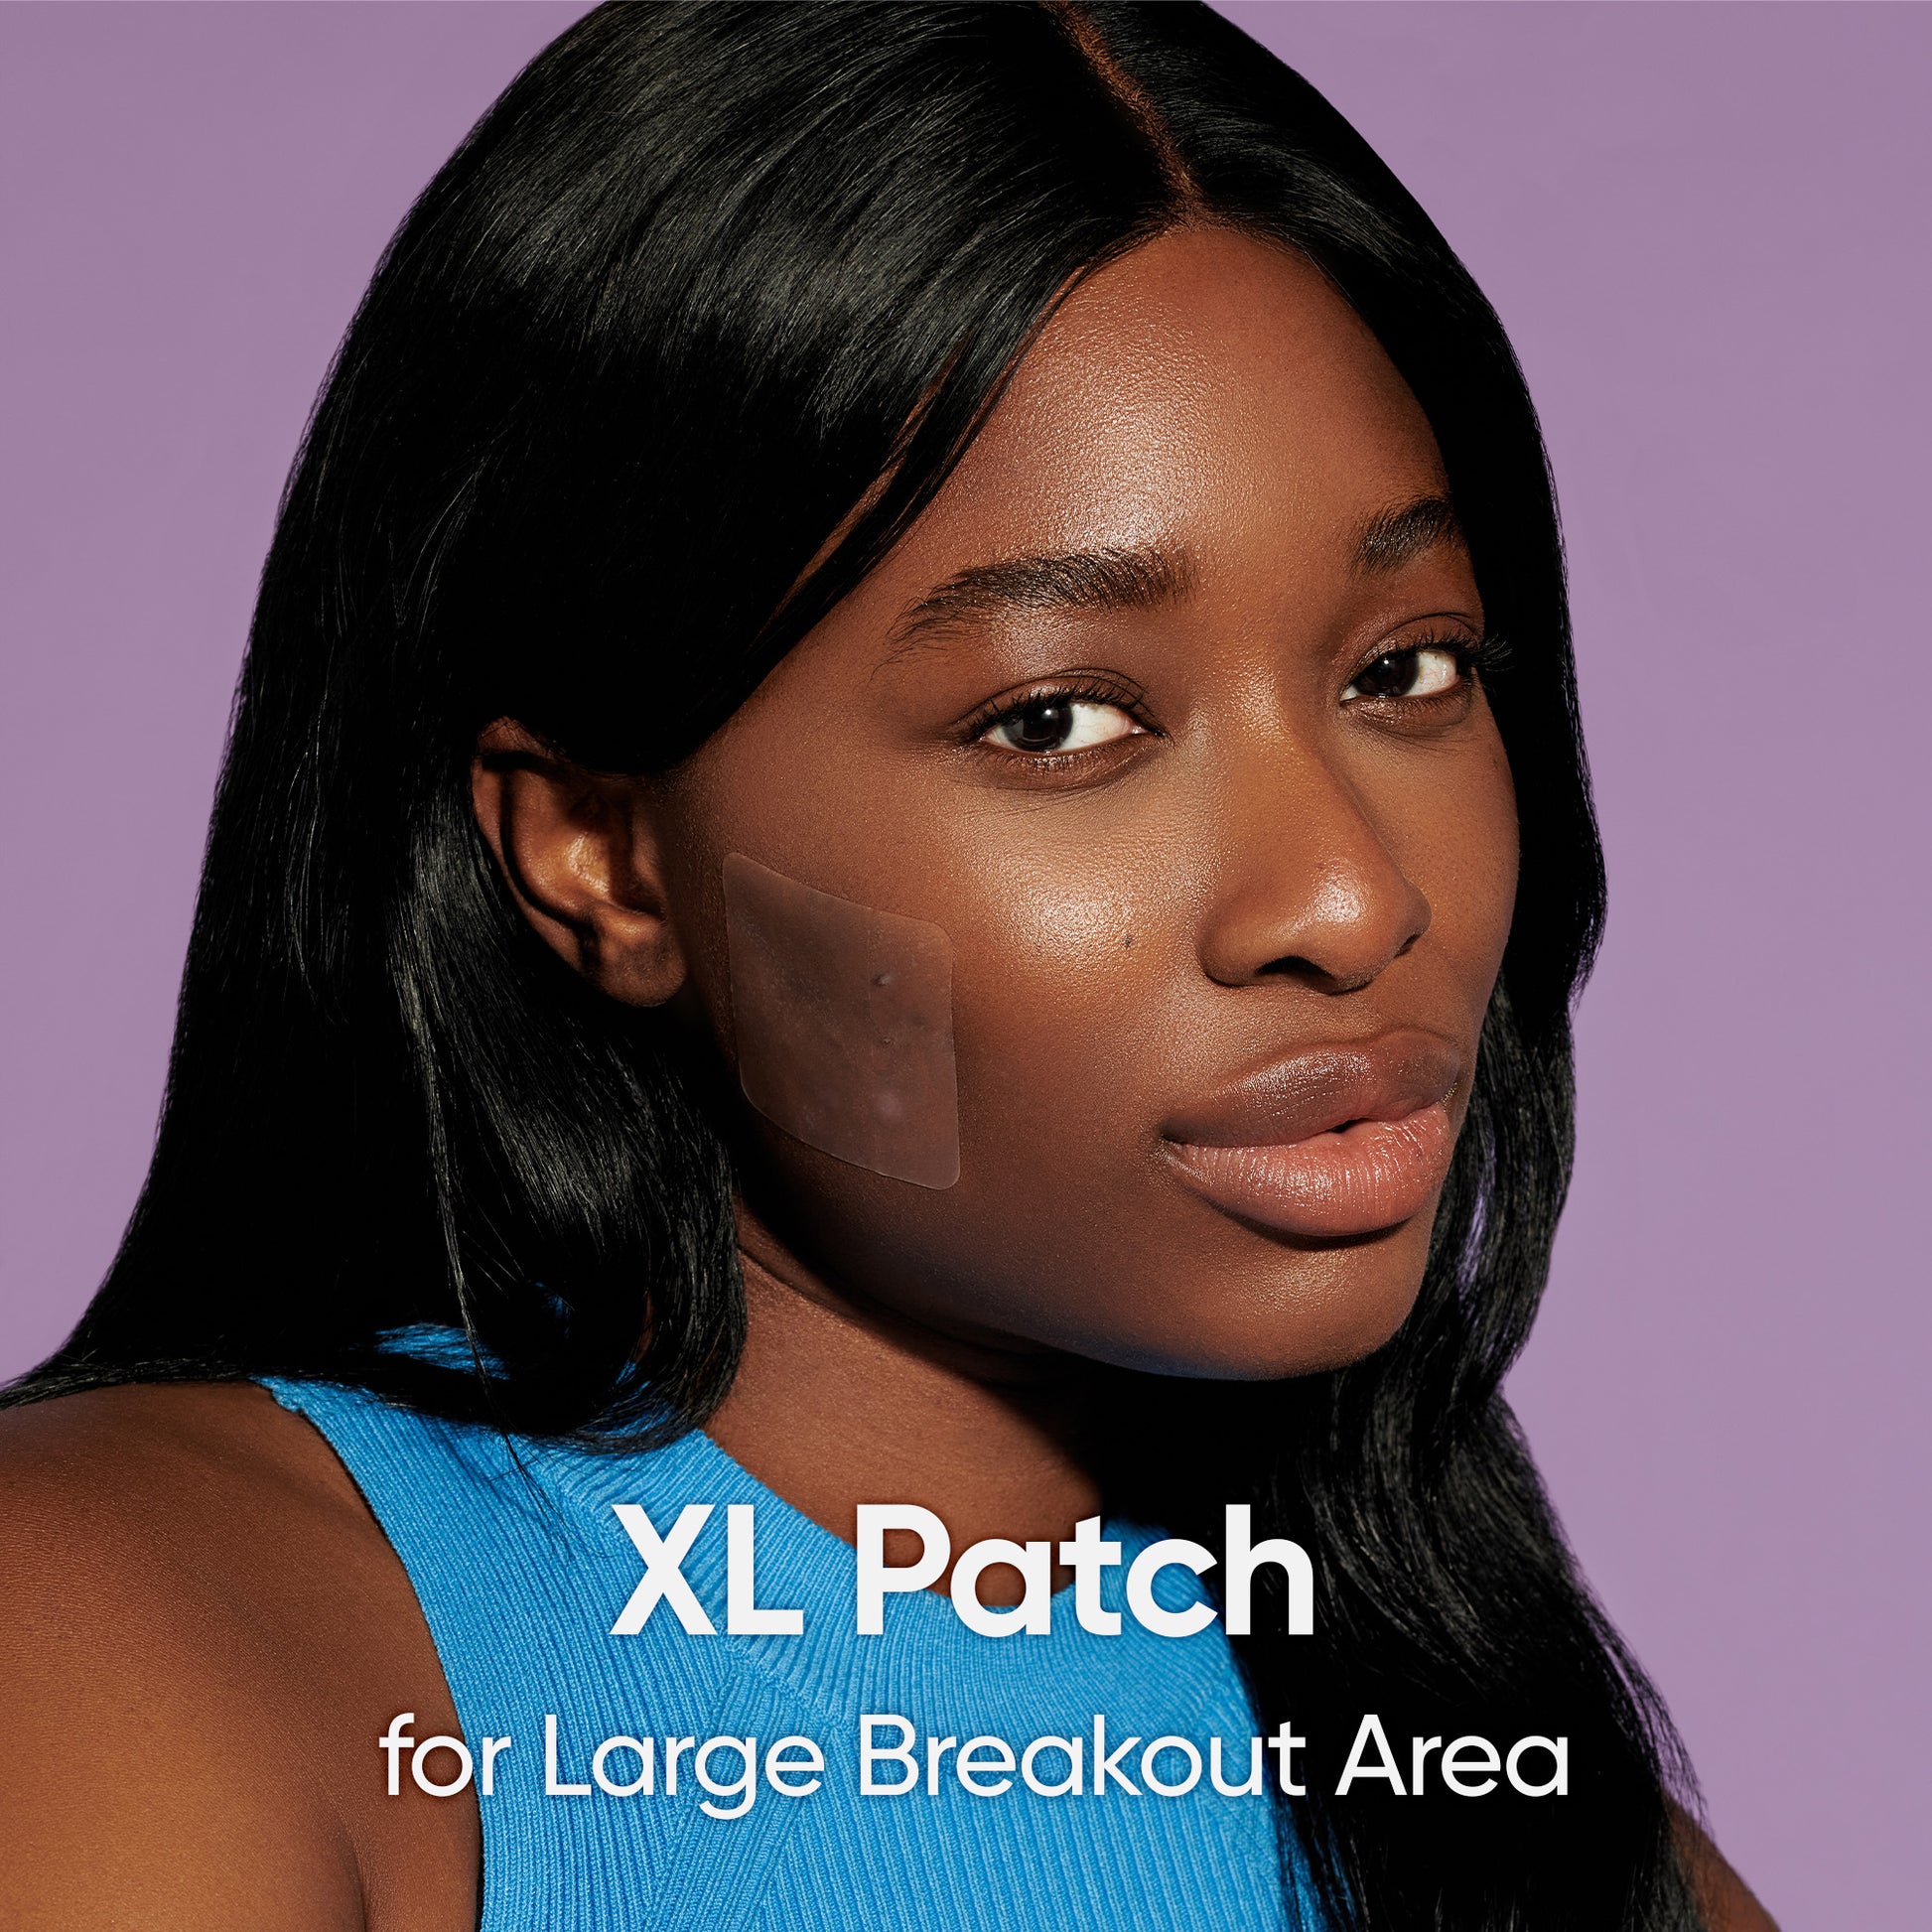 A close-up of the Breakout Patch Classic XL packaging highlighting its use for large breakout areas